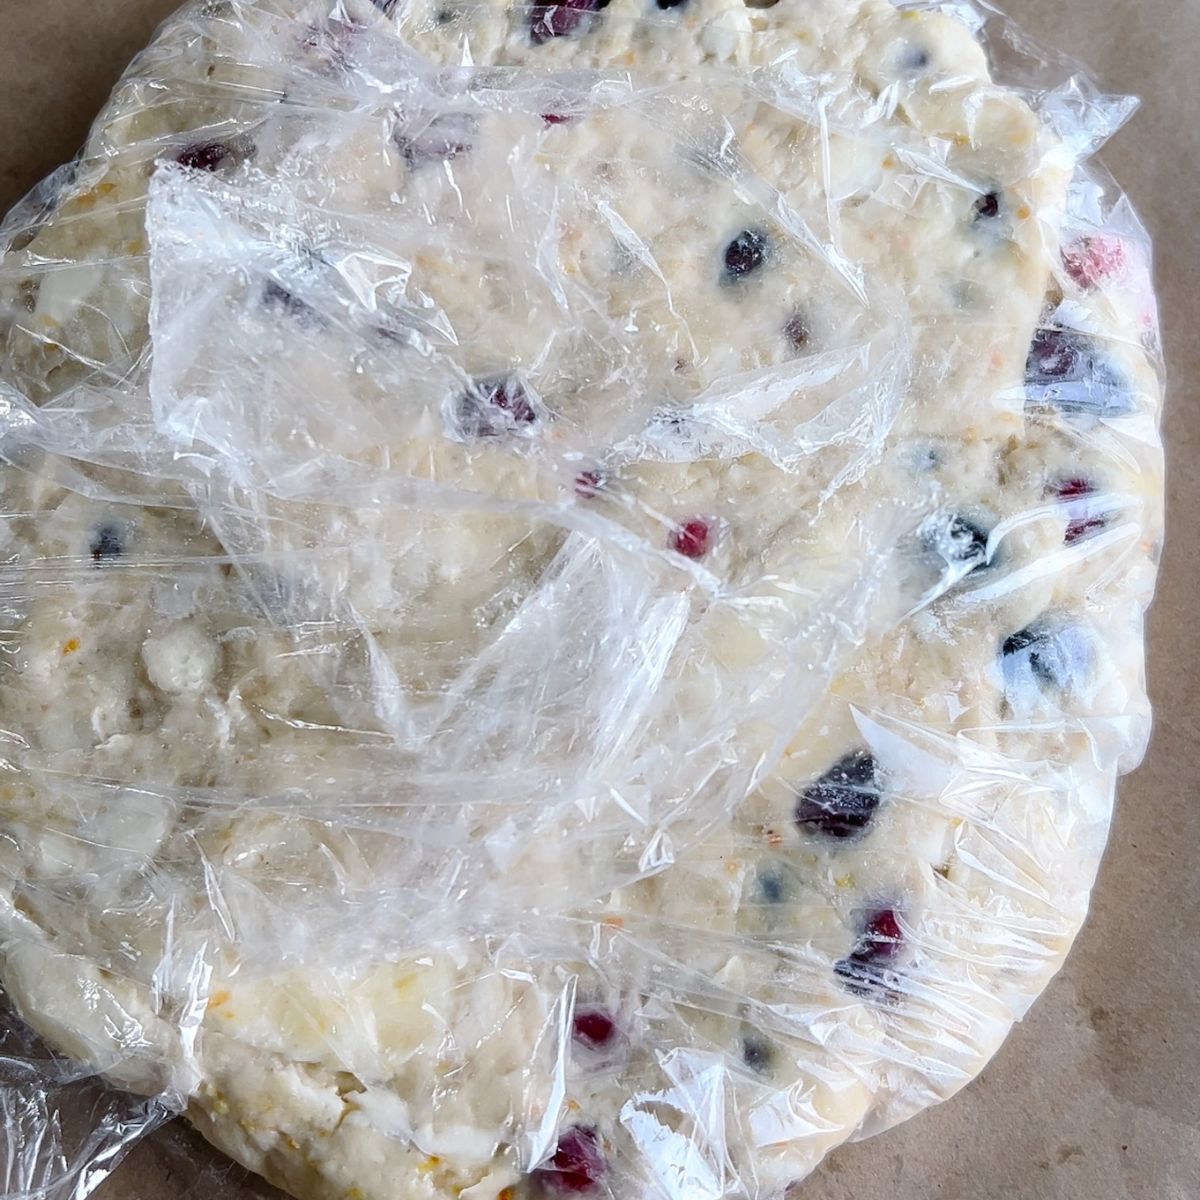 Disc of dough wrapped in plastic wrap.